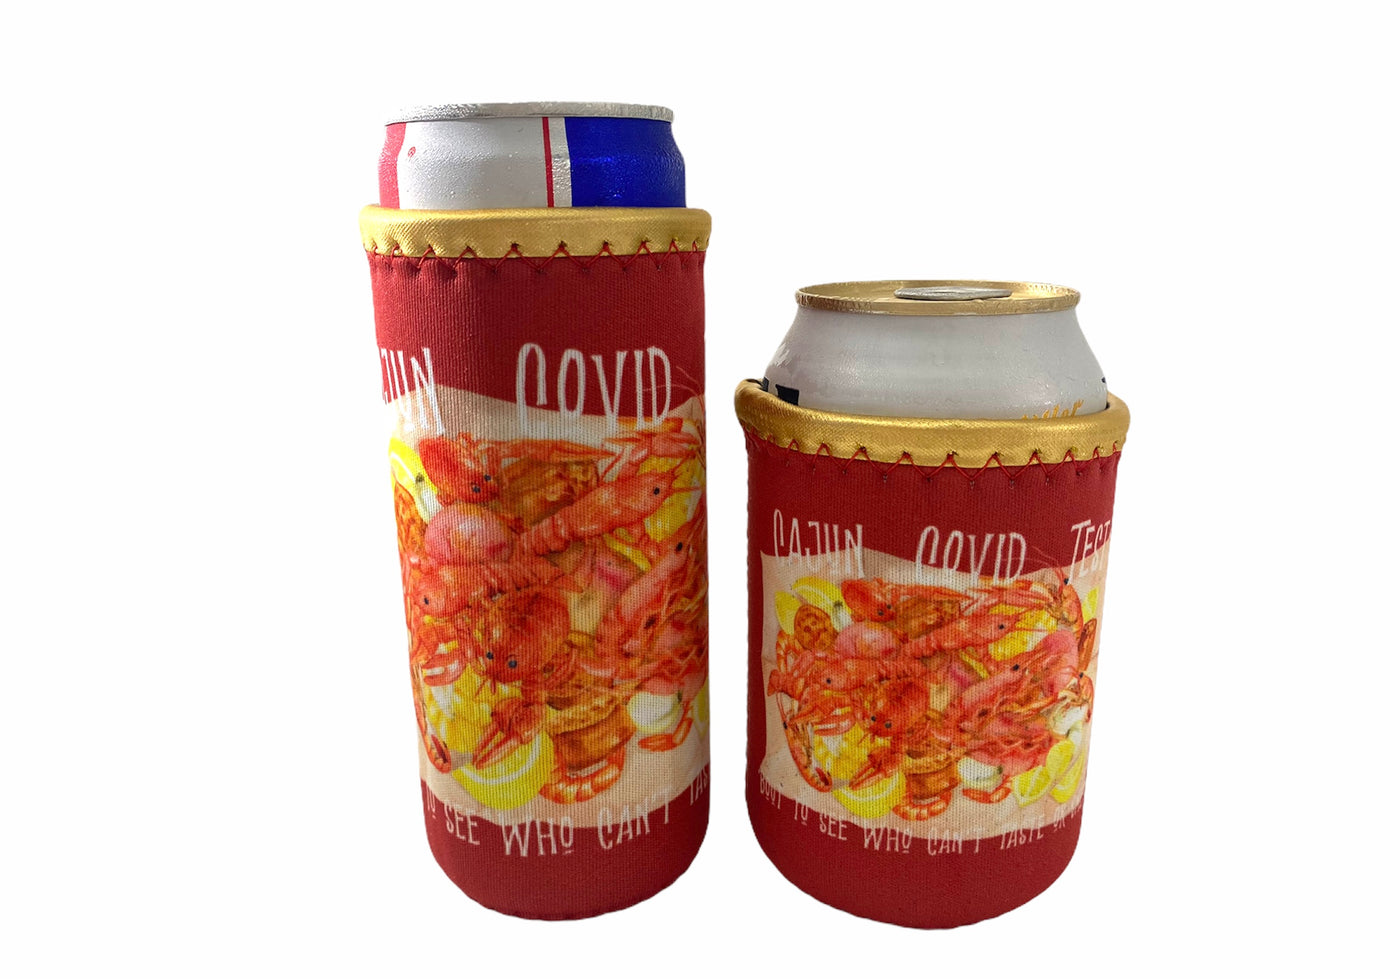 Red Neoprene Koozie with gold trim. Graphic is a piece of craft paper loaded with crawfish, sausage, potatoes, corn, onions, garlic and lemons. Text above graphic says "Cajun Covid Test" and the text below says "Bout To see who can't taste or smell" All text in white.